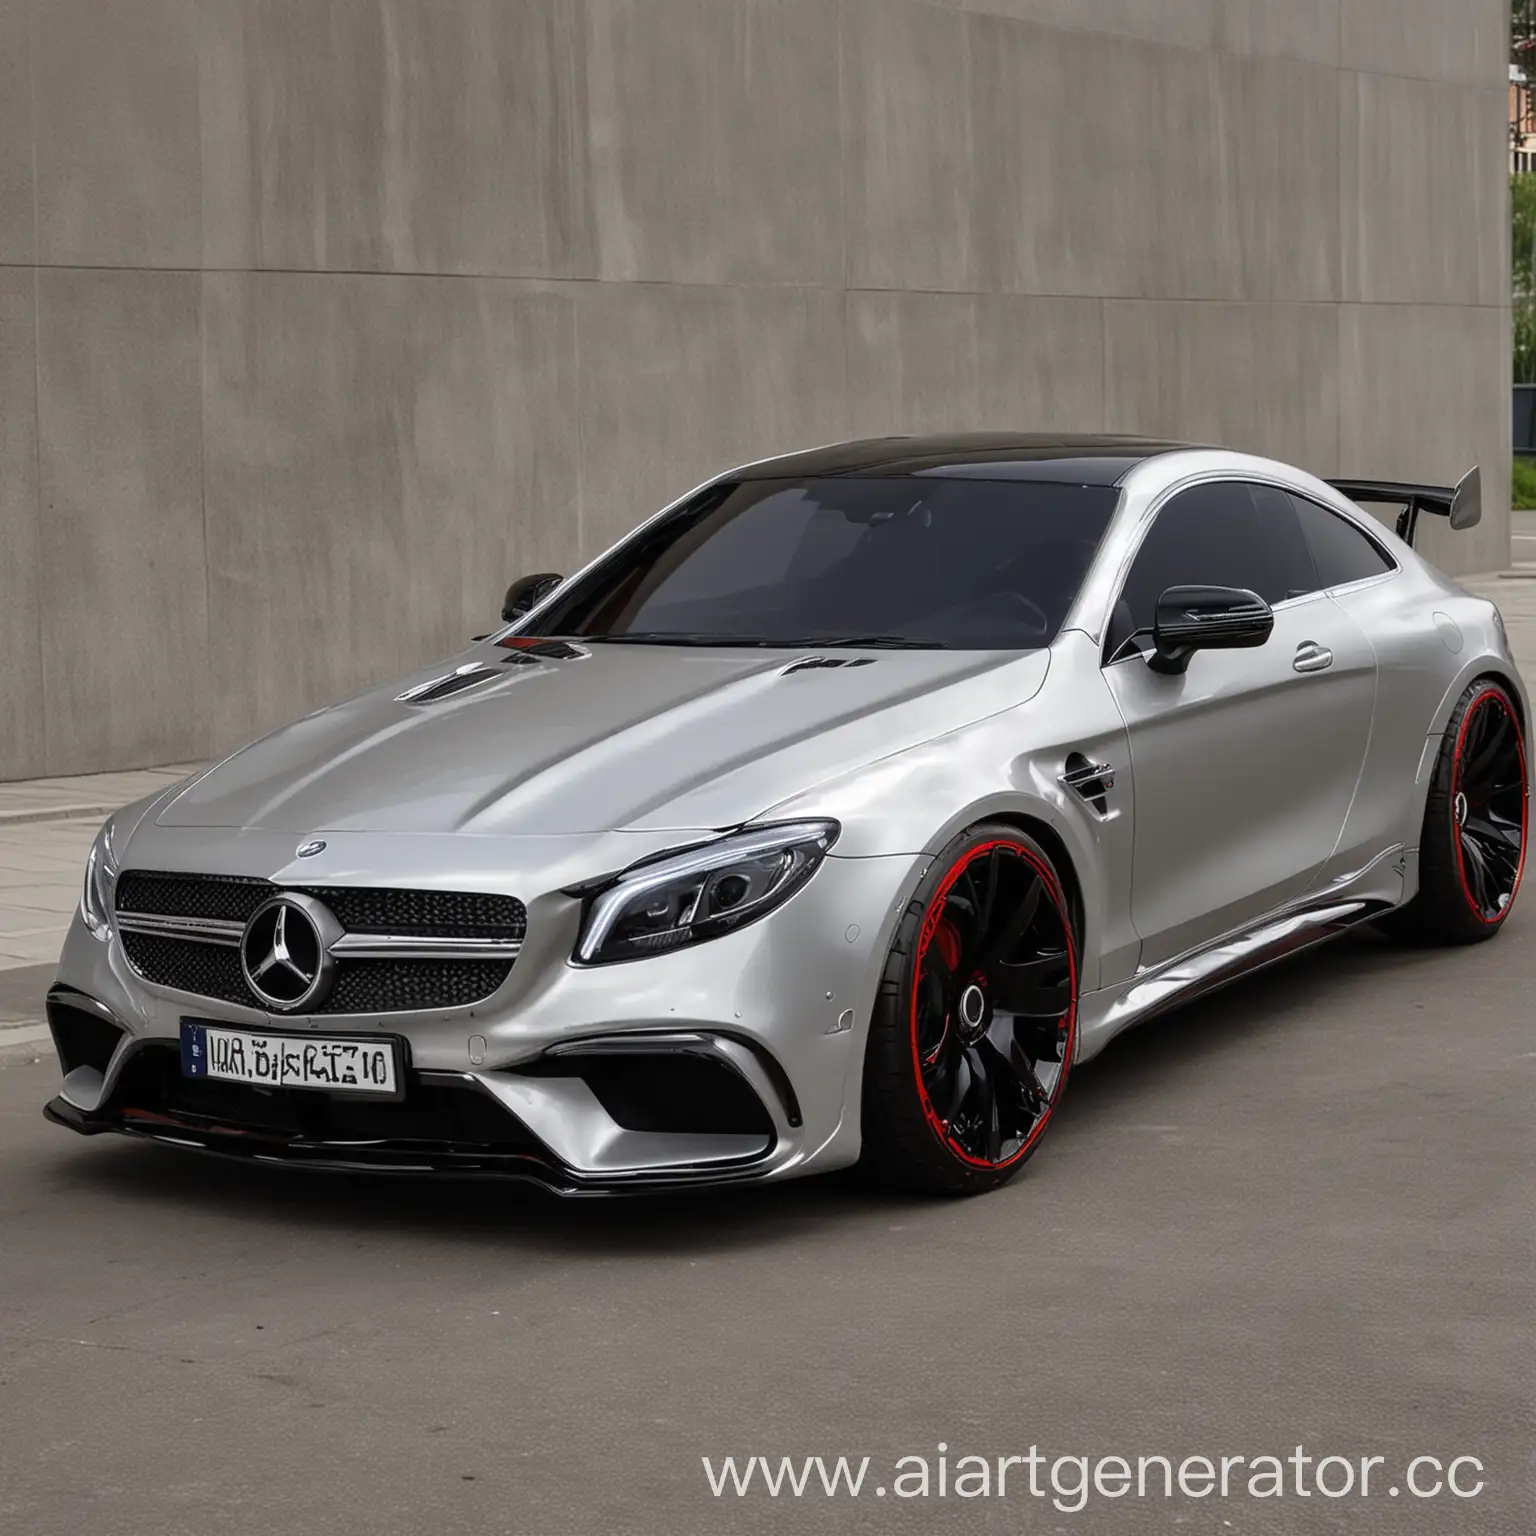 Stylish-Custom-Red-Mercedes-Car-with-Black-Stripes-and-LED-Headlights